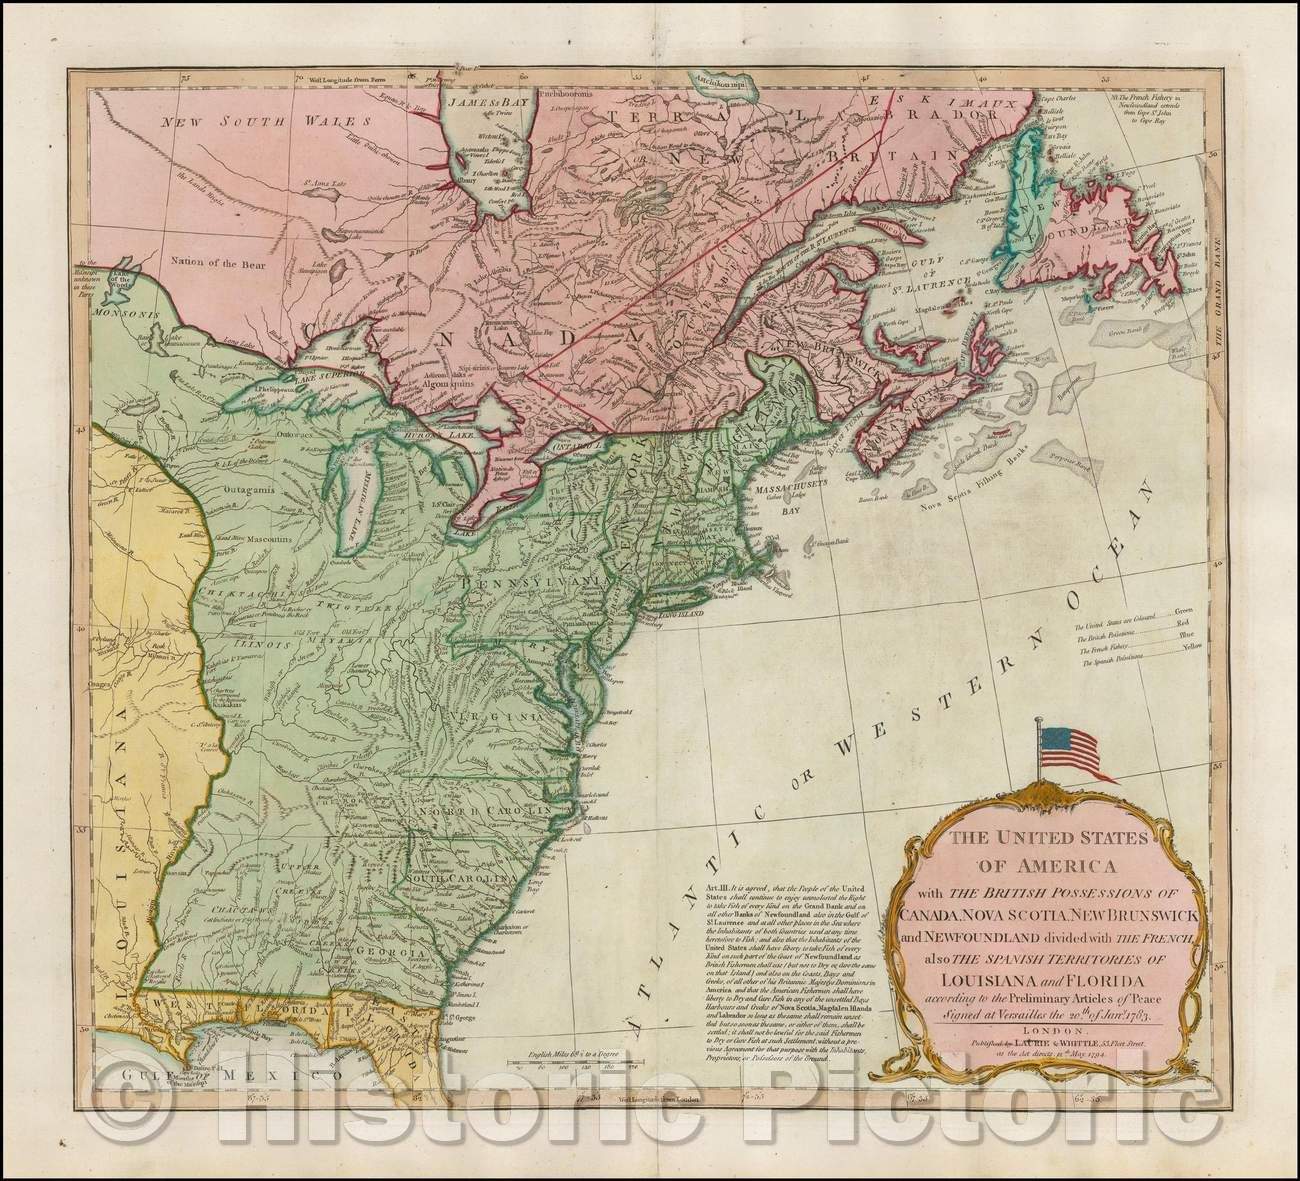 Historic Map - The United States of America with Territories of Louisiana and Florida, 1794 v1